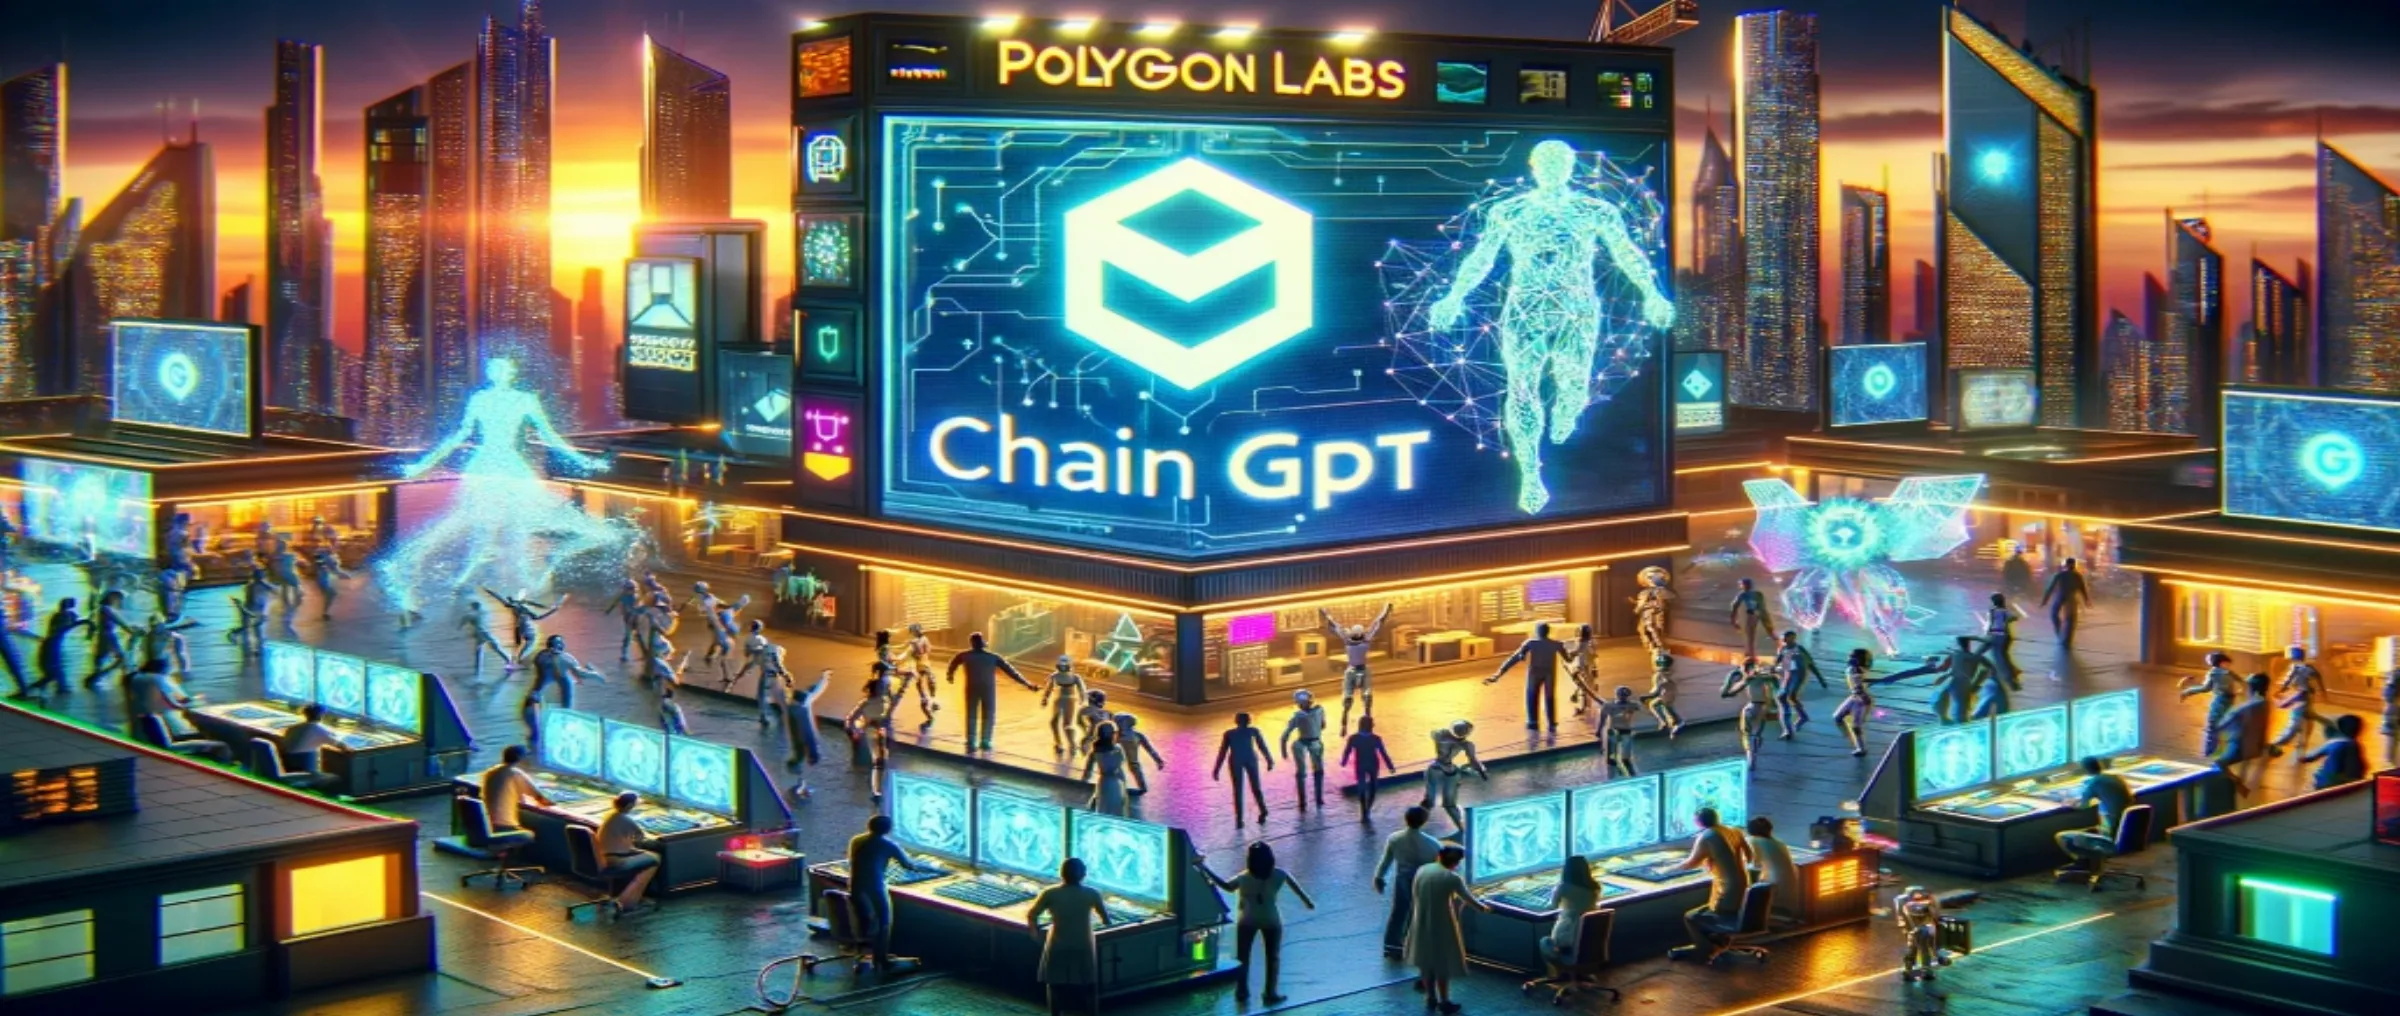 ChainGPT and Polygon Labs are collaborating to improve the creation of NFT using artificial intelligence